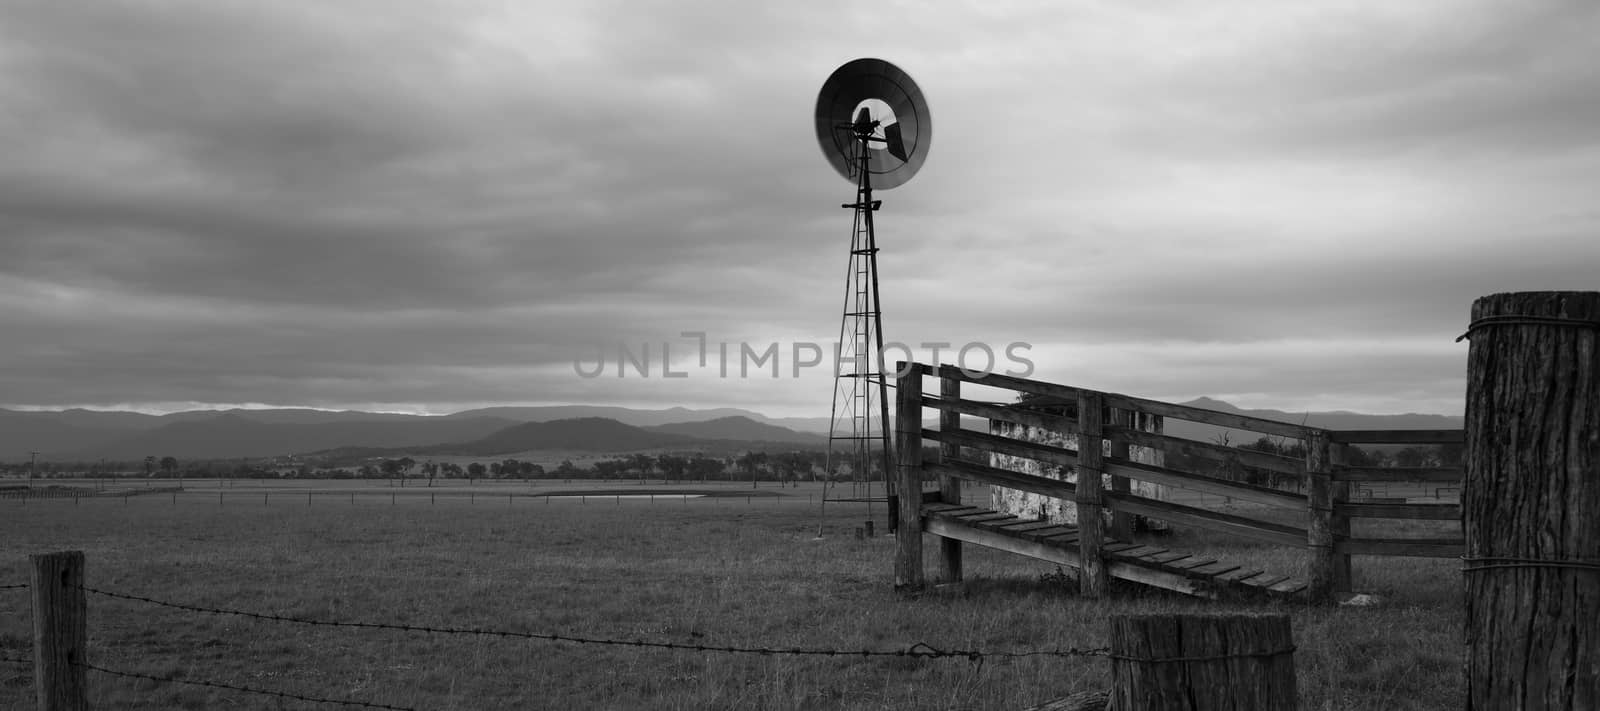 Windmill in the countryside. Black and White. by artistrobd